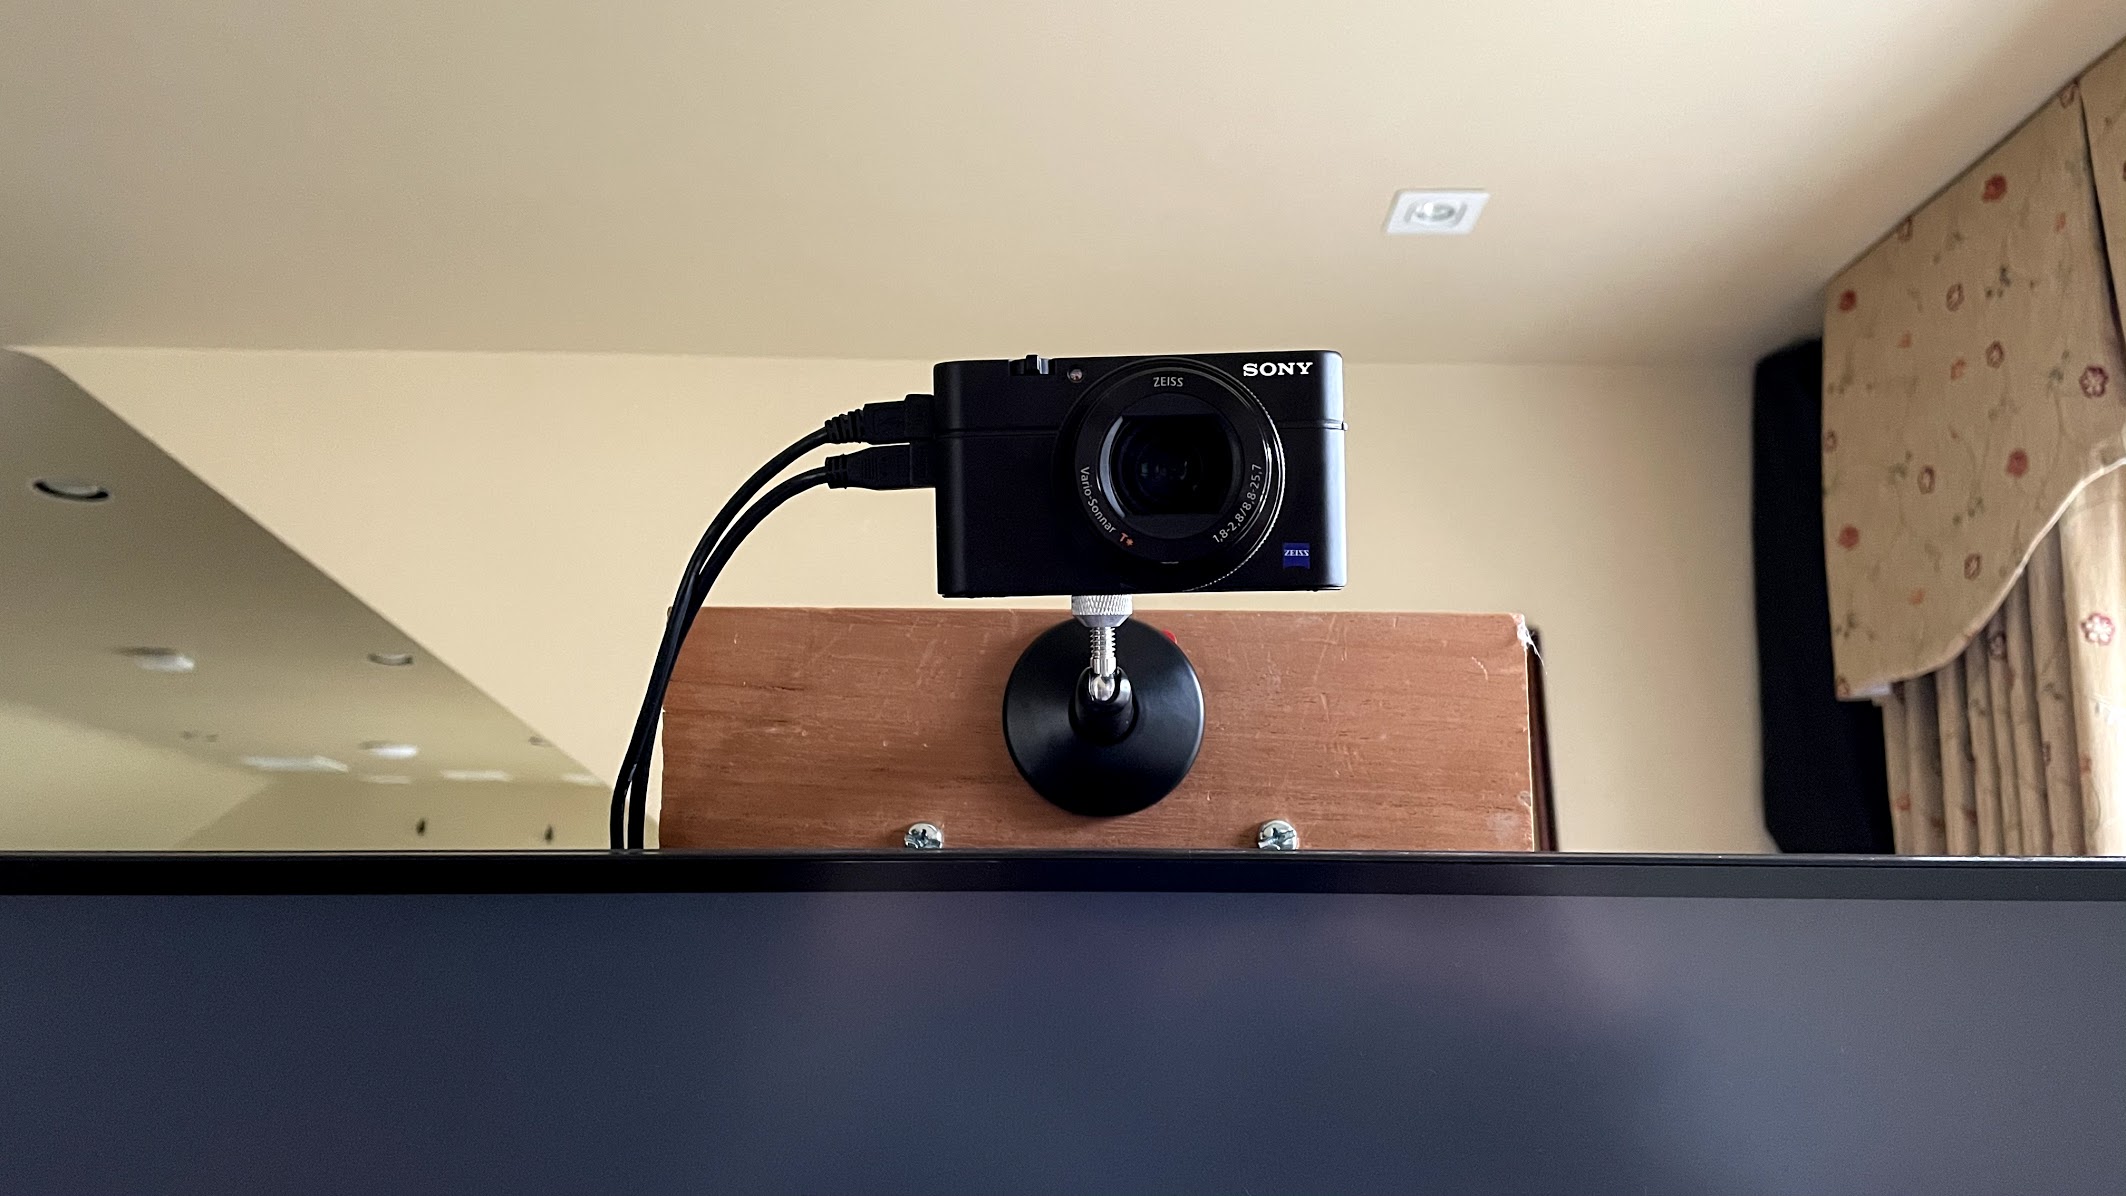 Camera mounted above my monitor where a webcam would be